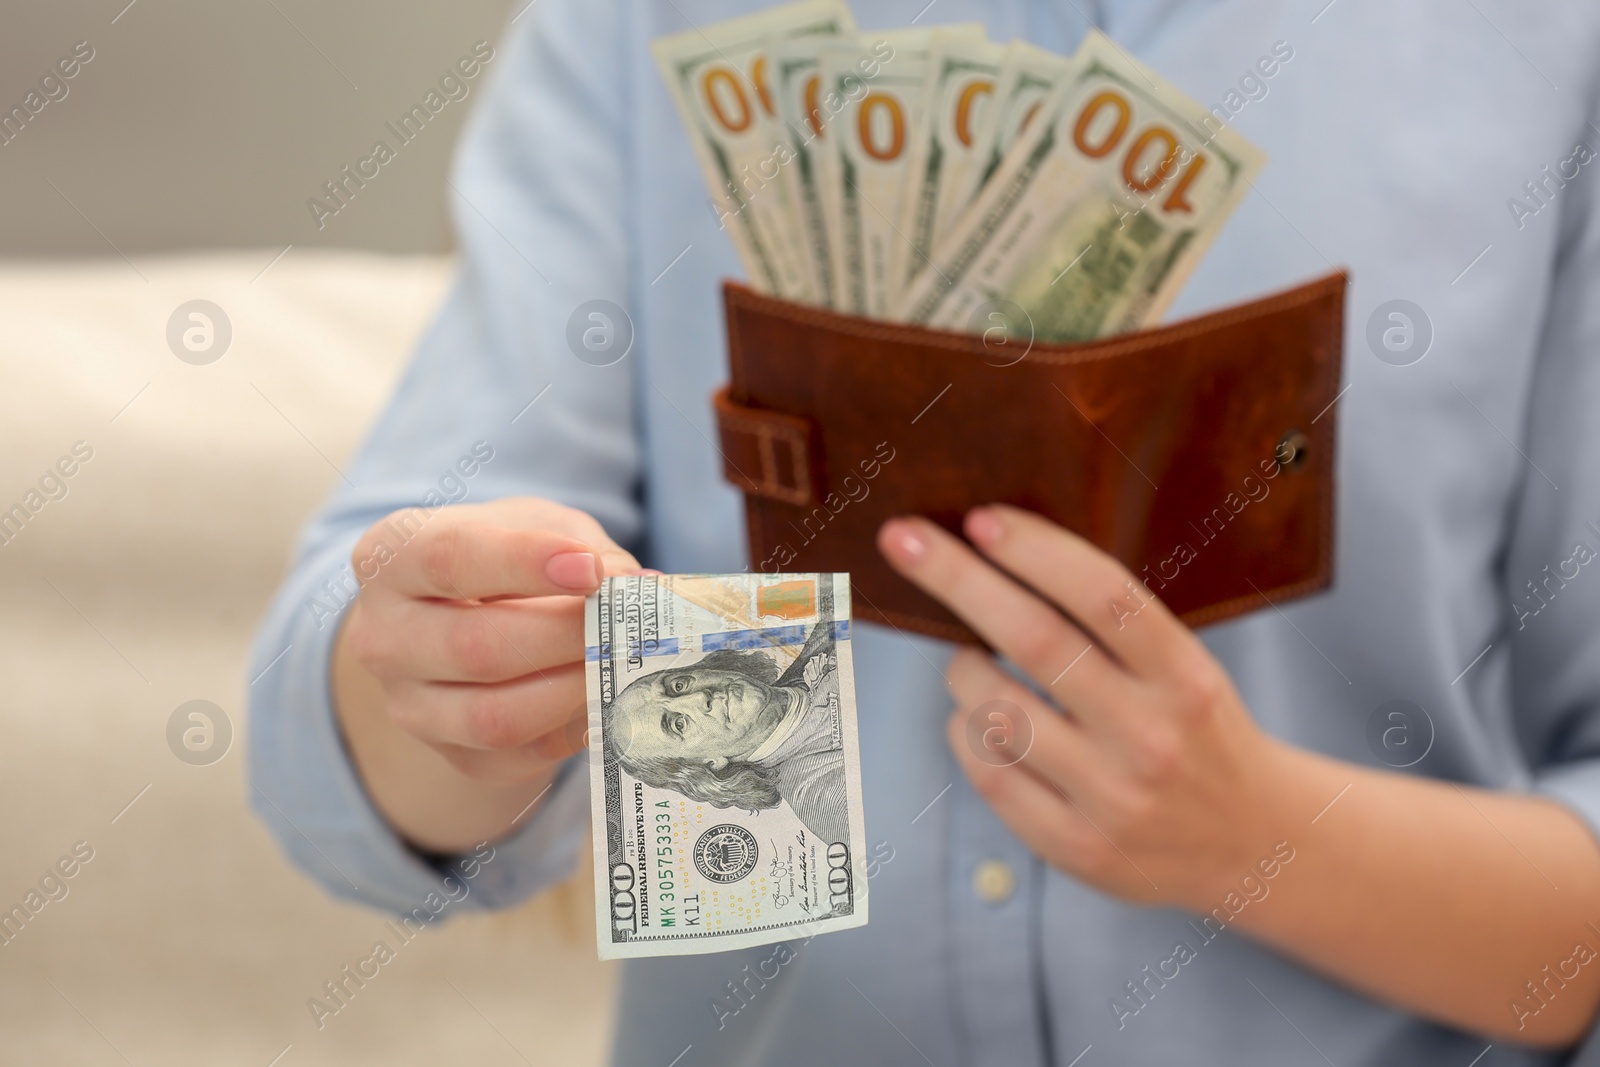 Photo of Woman giving 100 dollar bill and holding brown leather wallet with banknotes indoors, closeup. Money exchange